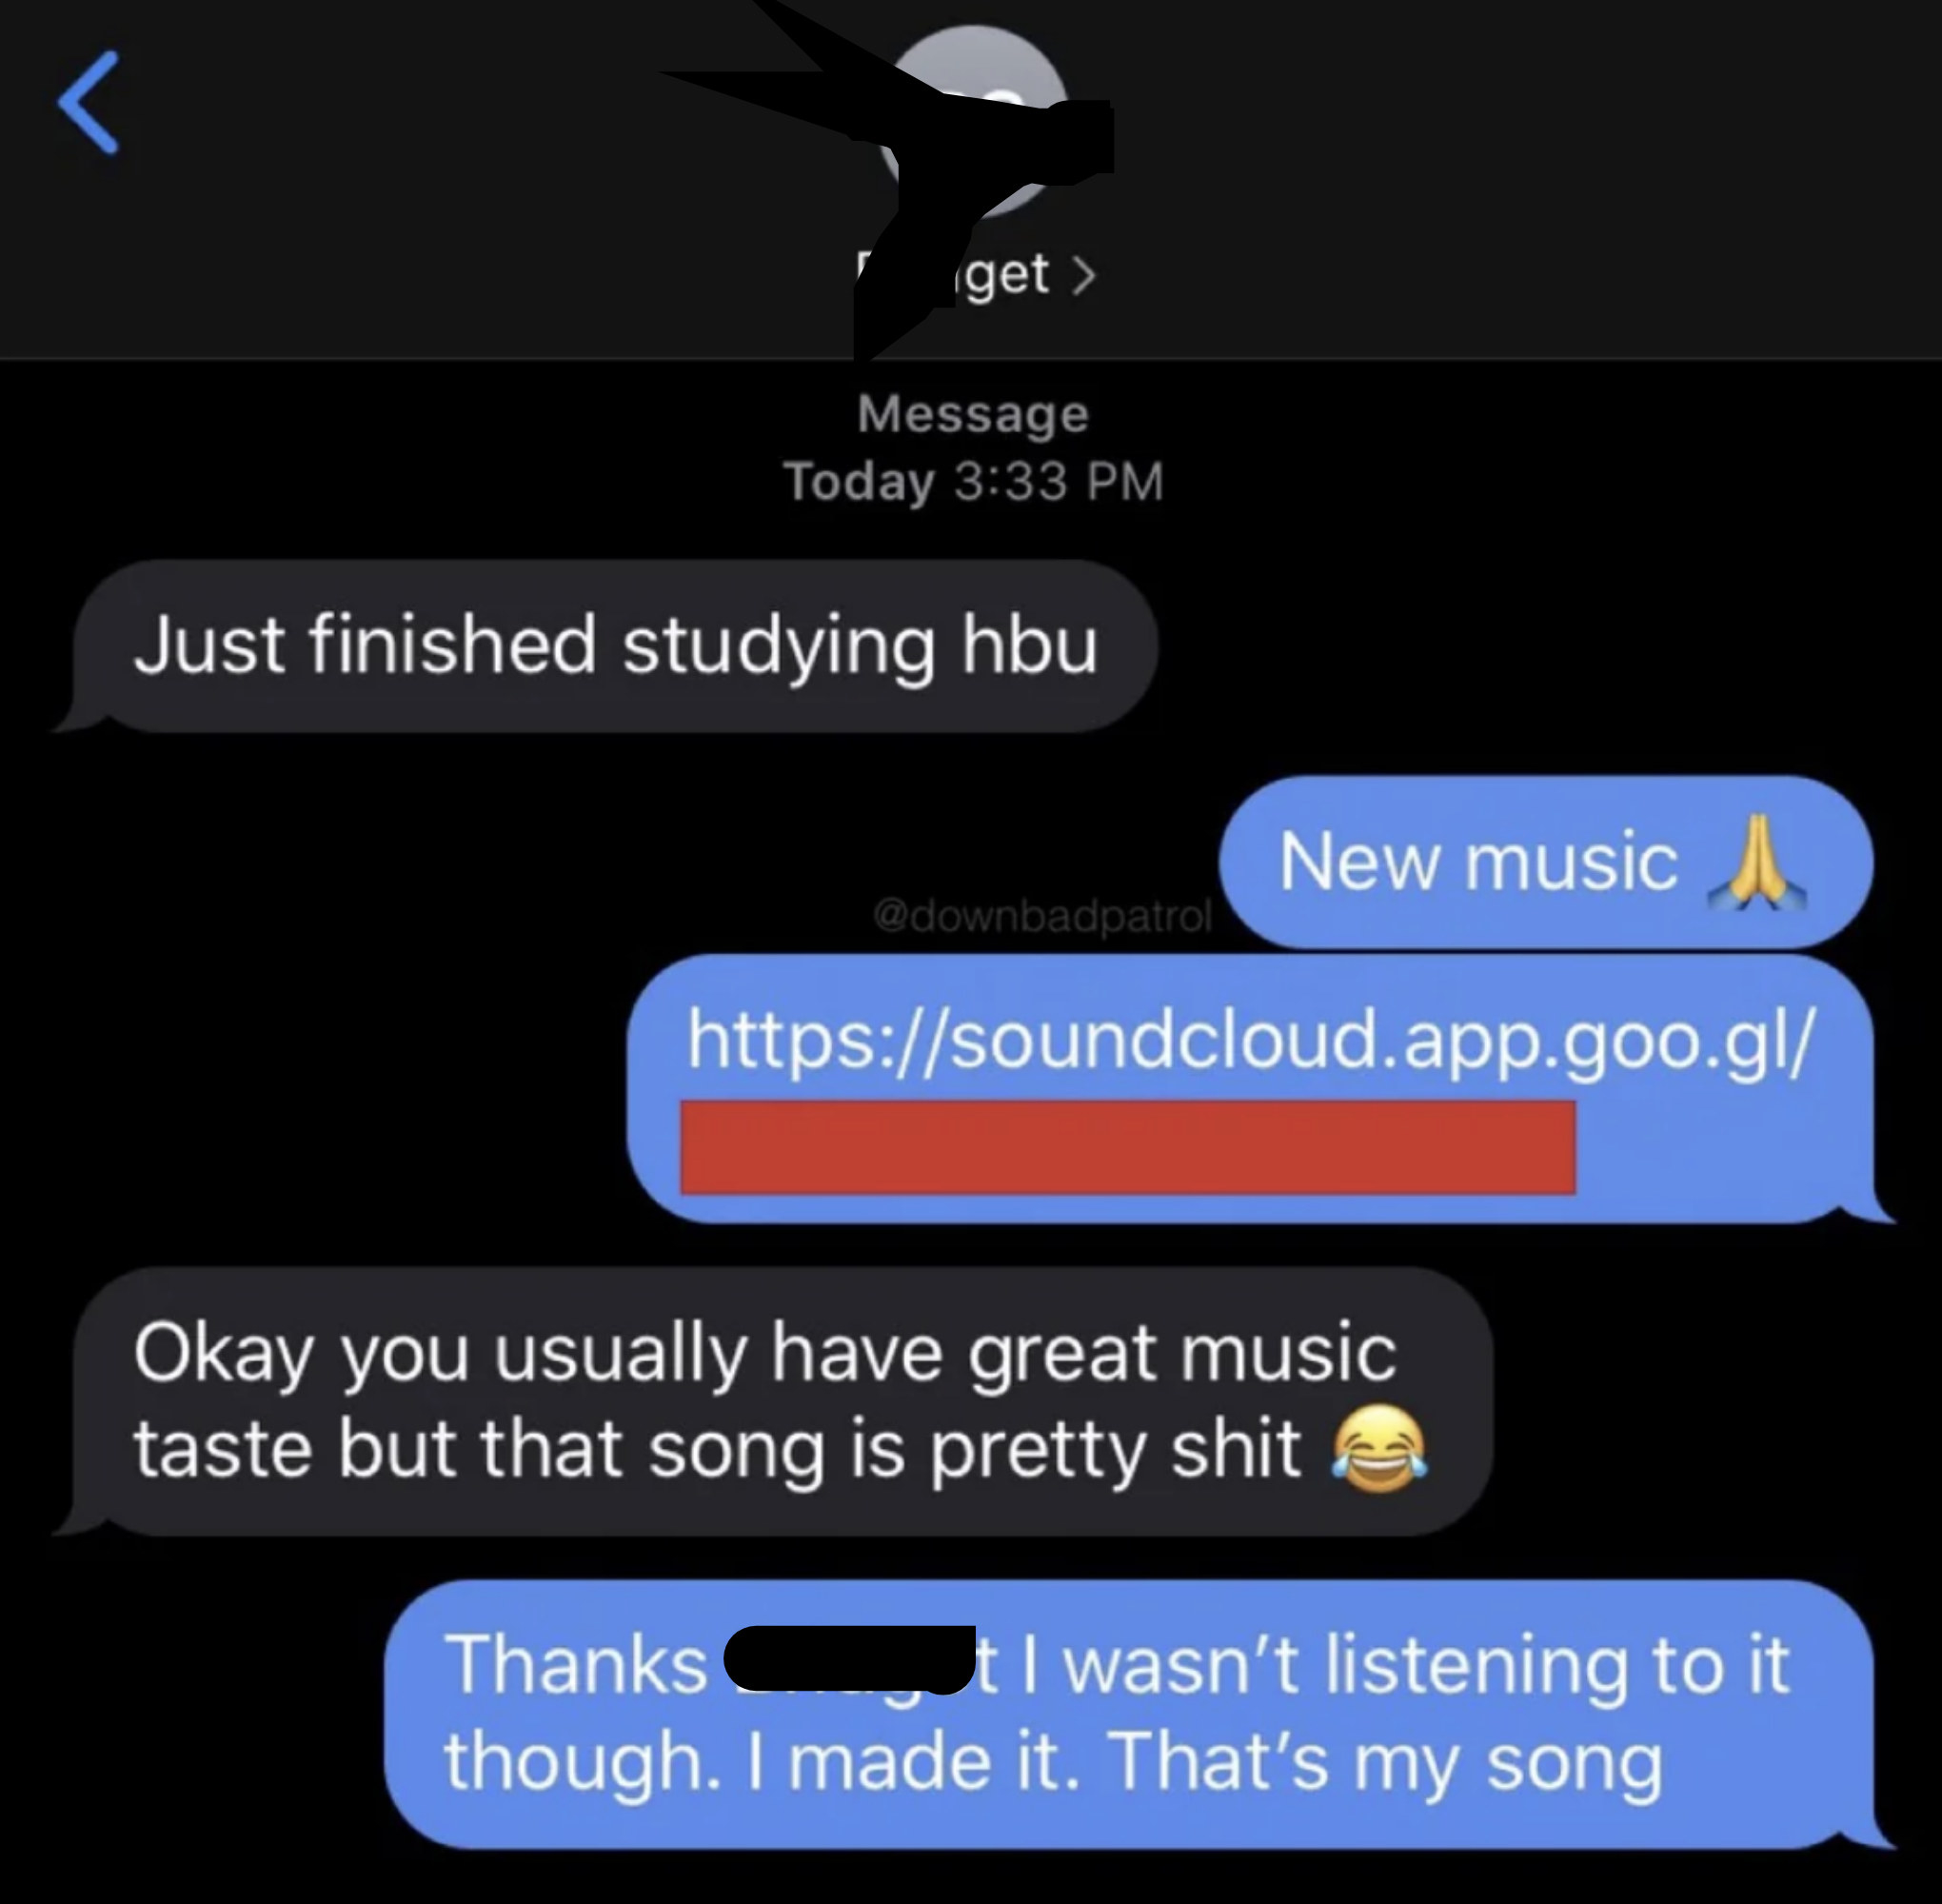 friend sends their new song and other responds, okay you usually have great music taste but that song is pretty shit and friend says that&#x27;s my song